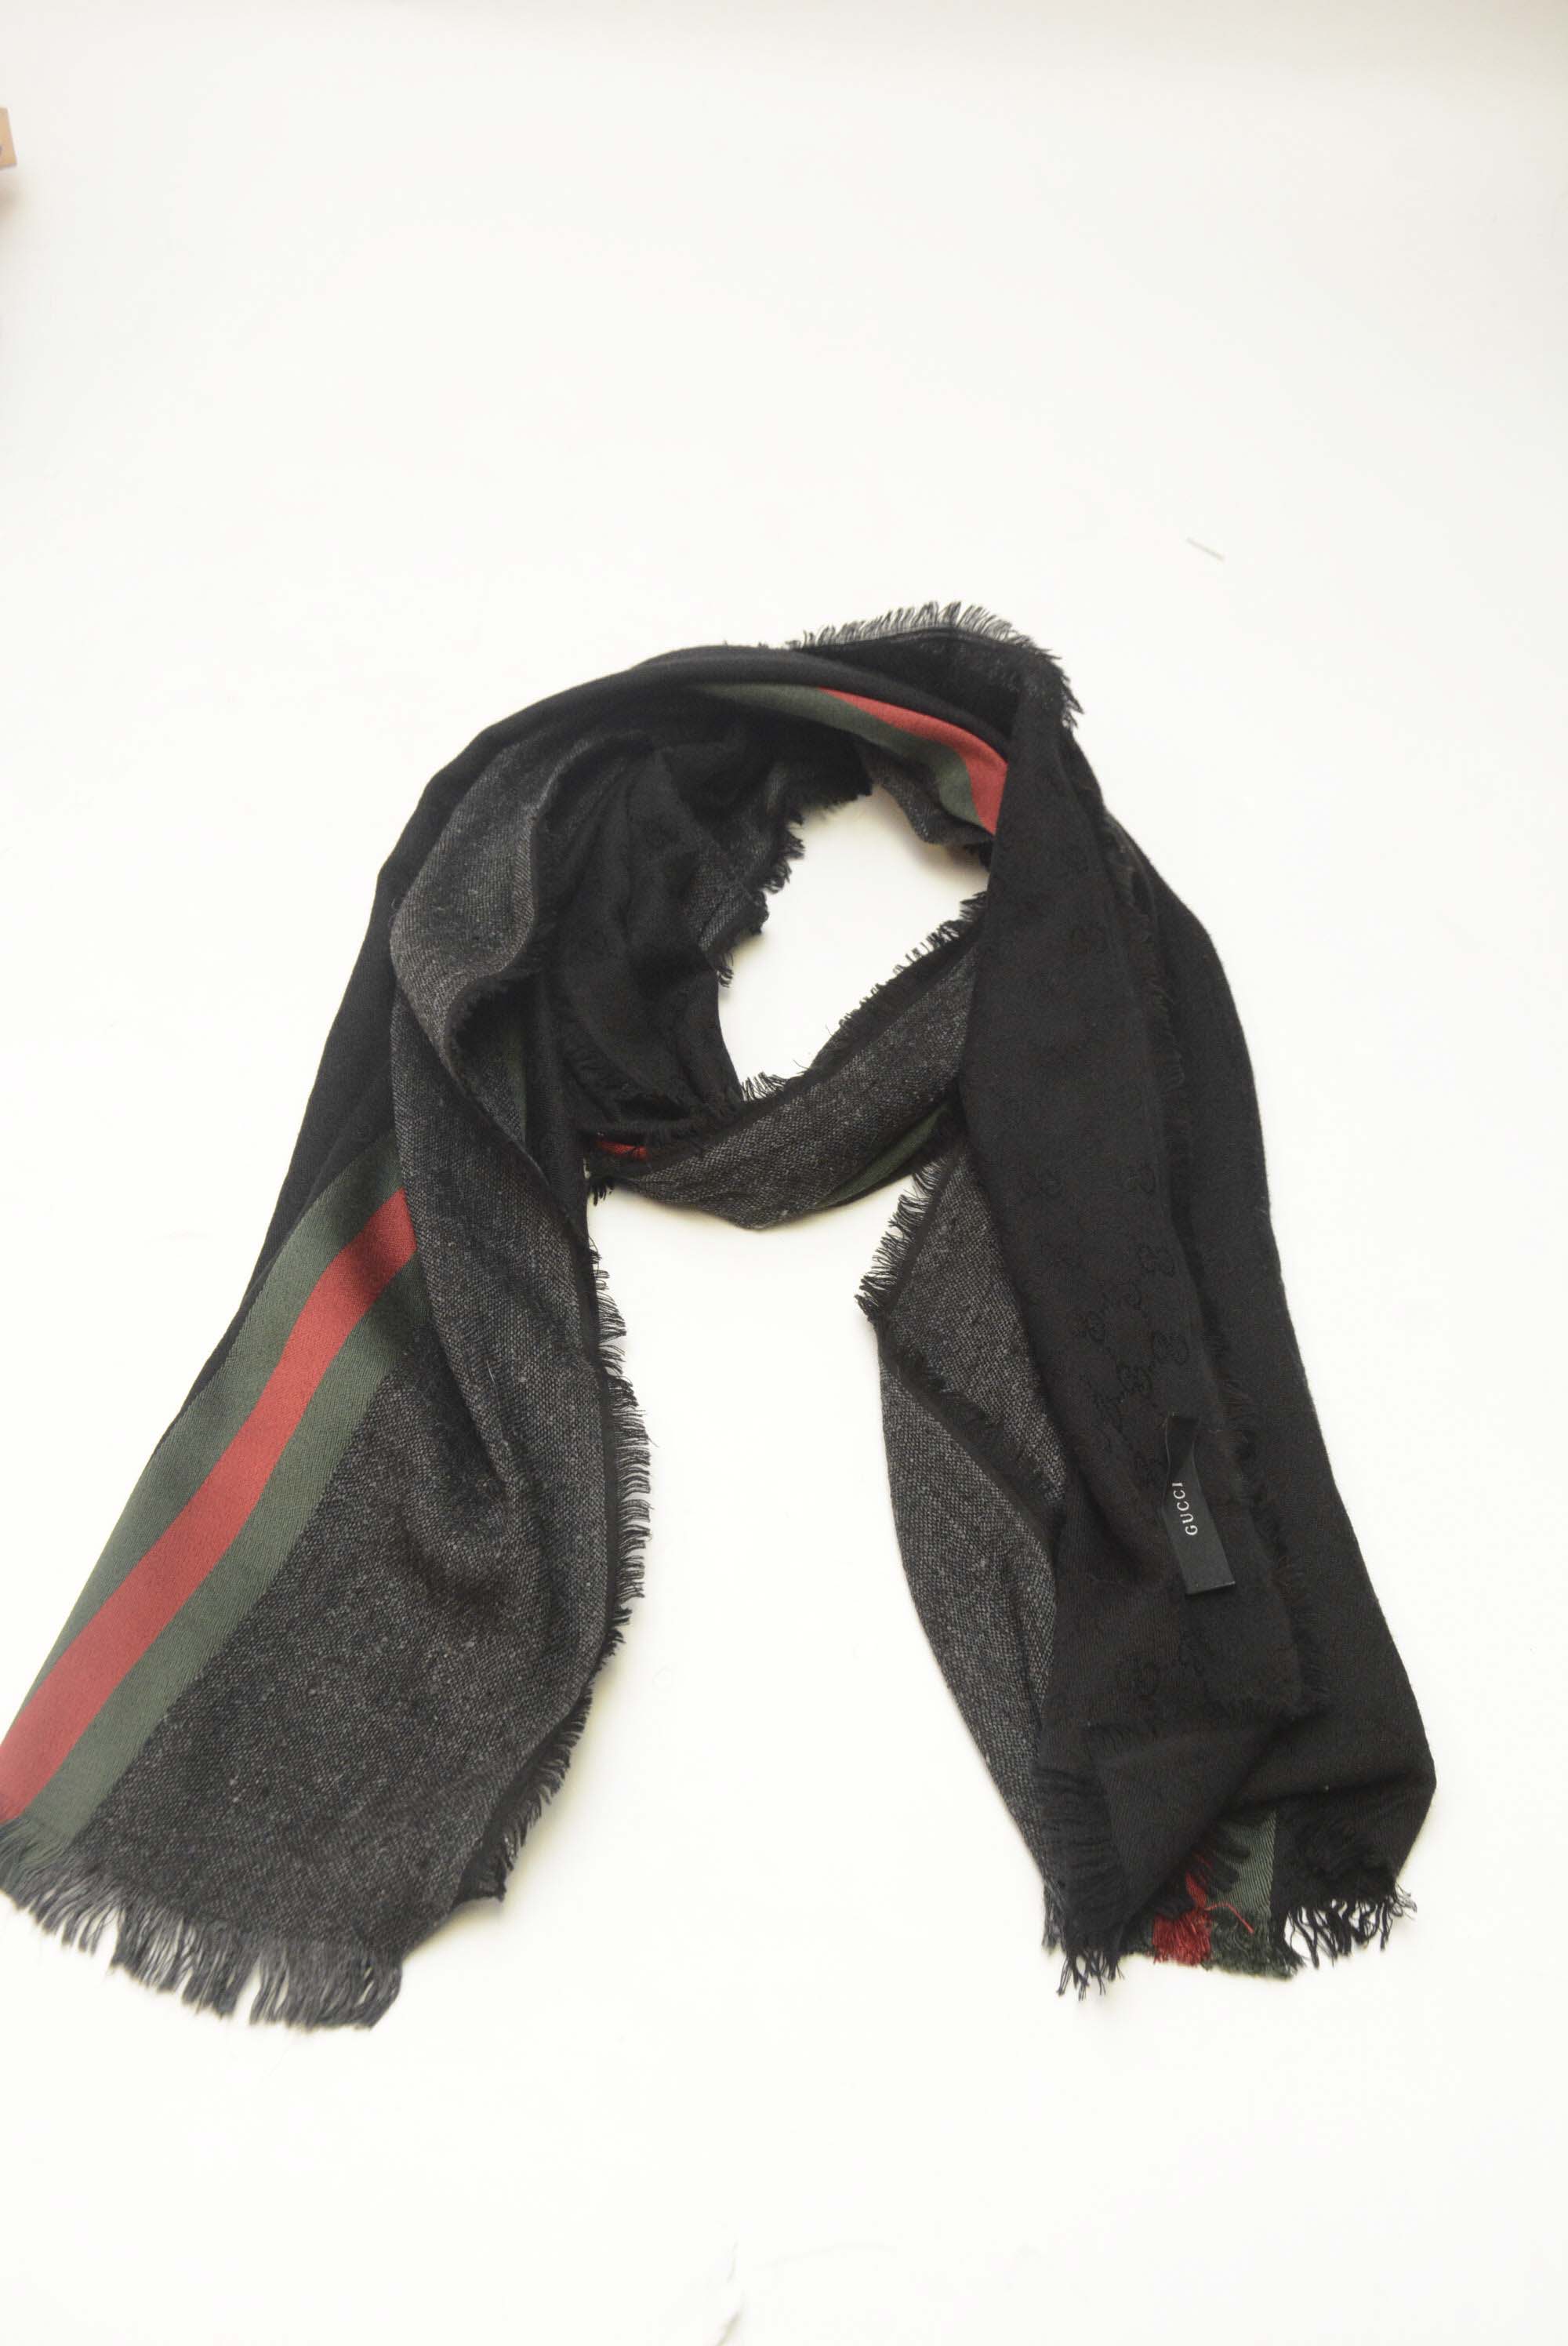 GUCCI RED & BLACK SCARF - TheFlexBoss